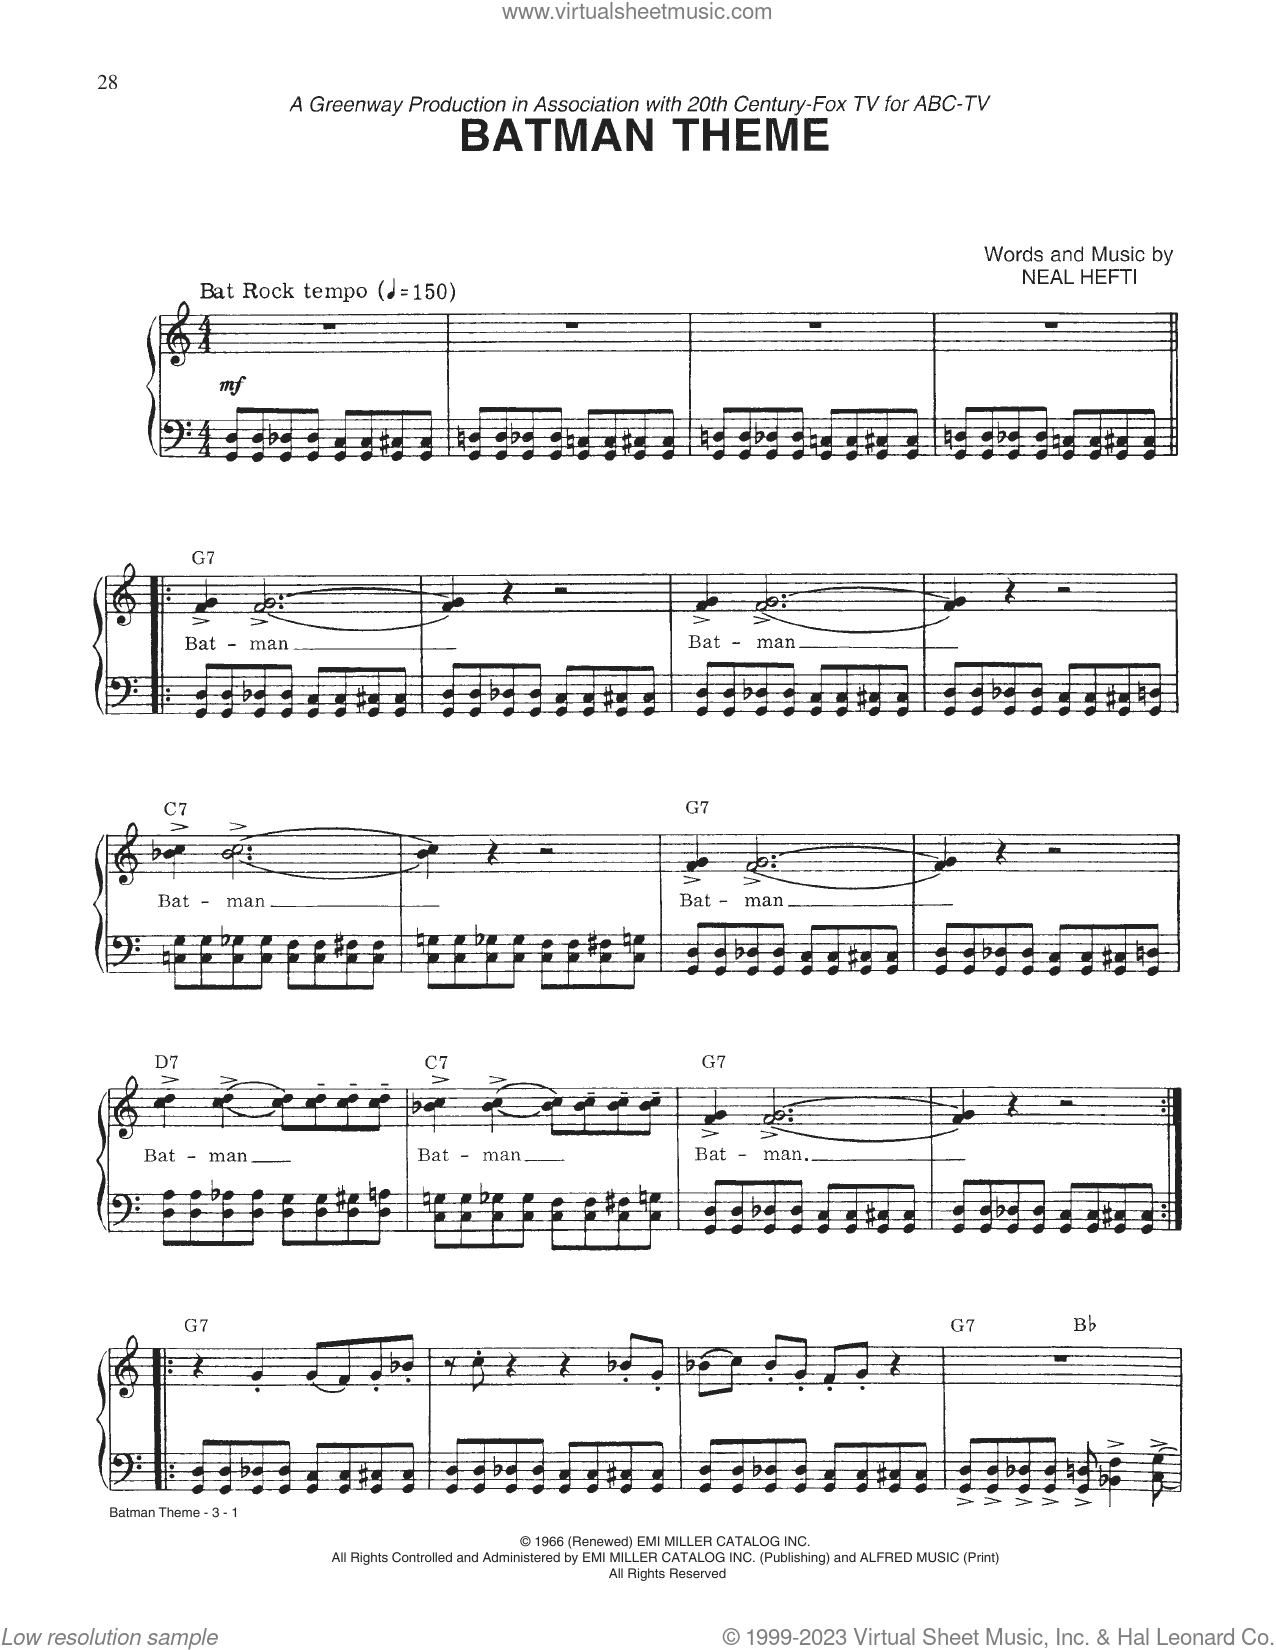 Batman Theme sheet music for voice and piano (PDF)